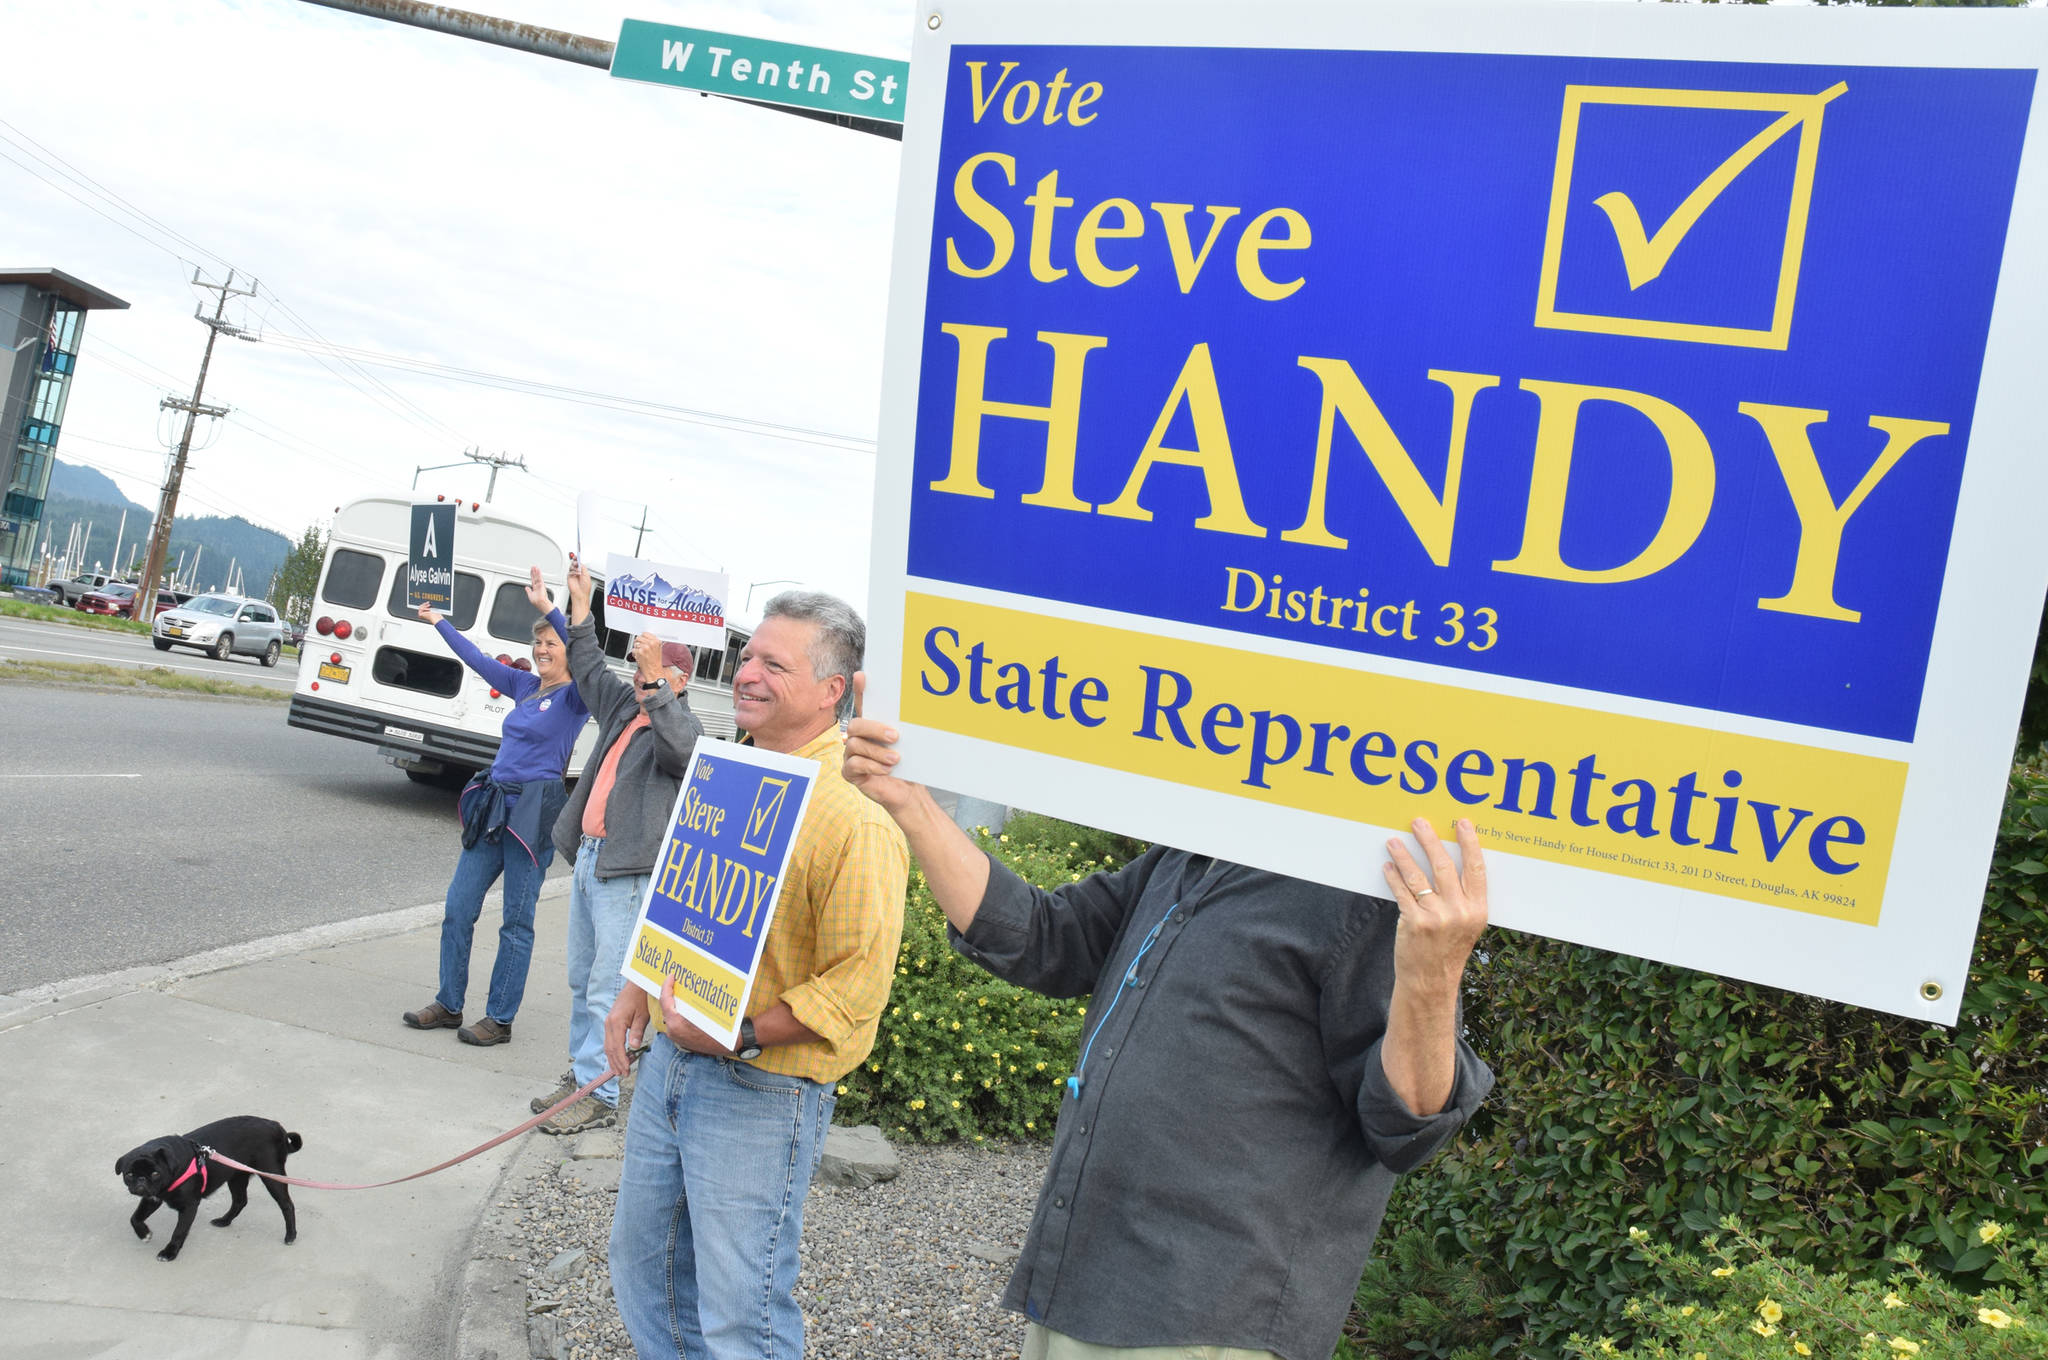 Steve Handy, Democratic candidate for House District 33, is accompanied by his pug, Panda, while waving signs at the Douglas Bridge intersection on Tuesday, Aug. 21, 2018. (James Brooks | Juneau Empire)